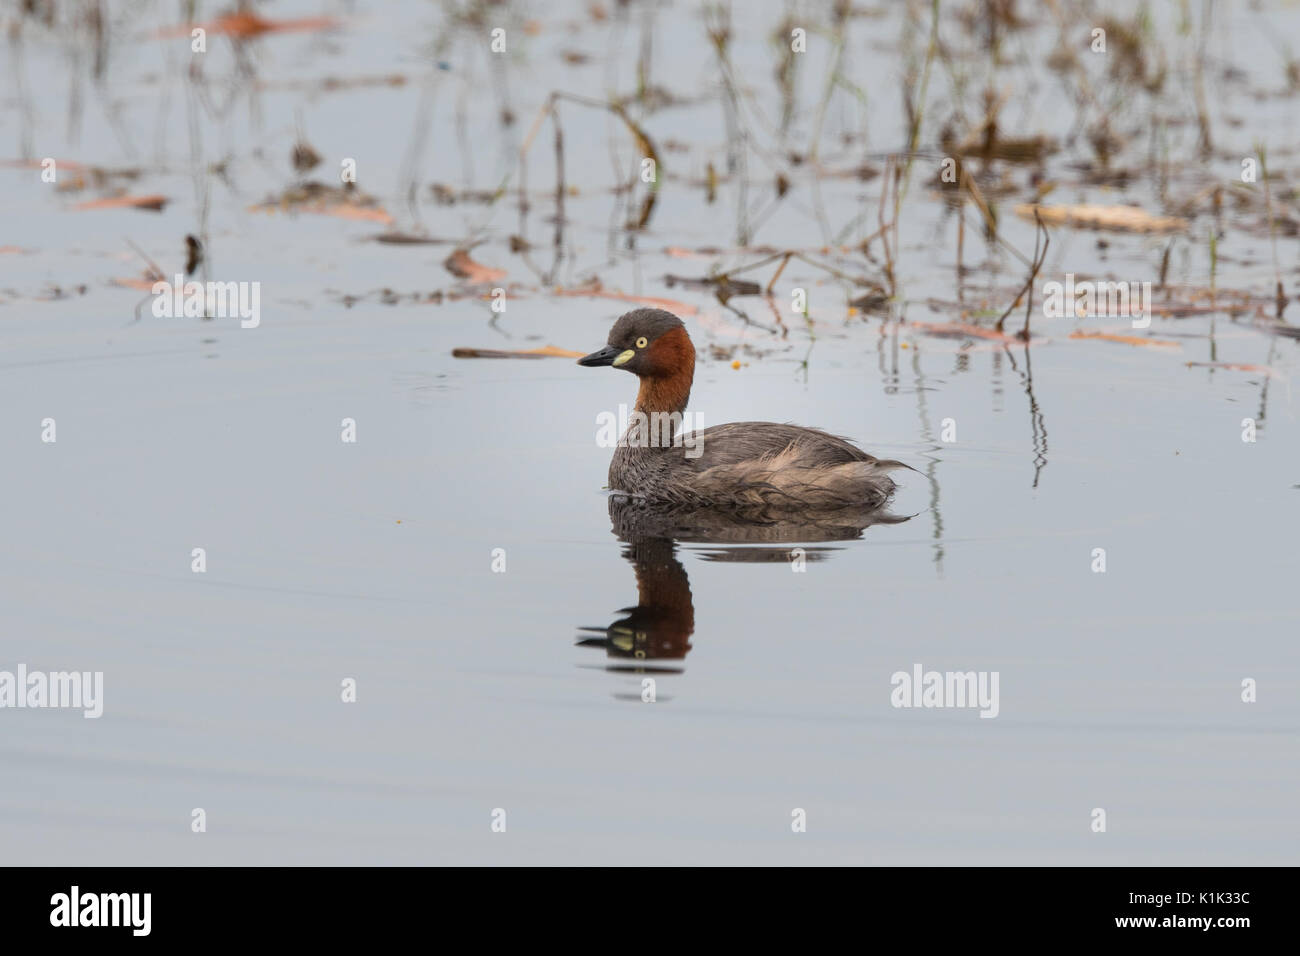 The little grebe (Tachybaptus ruficollis), also known as dabchick, is a member of the grebe family of water birds. Stock Photo